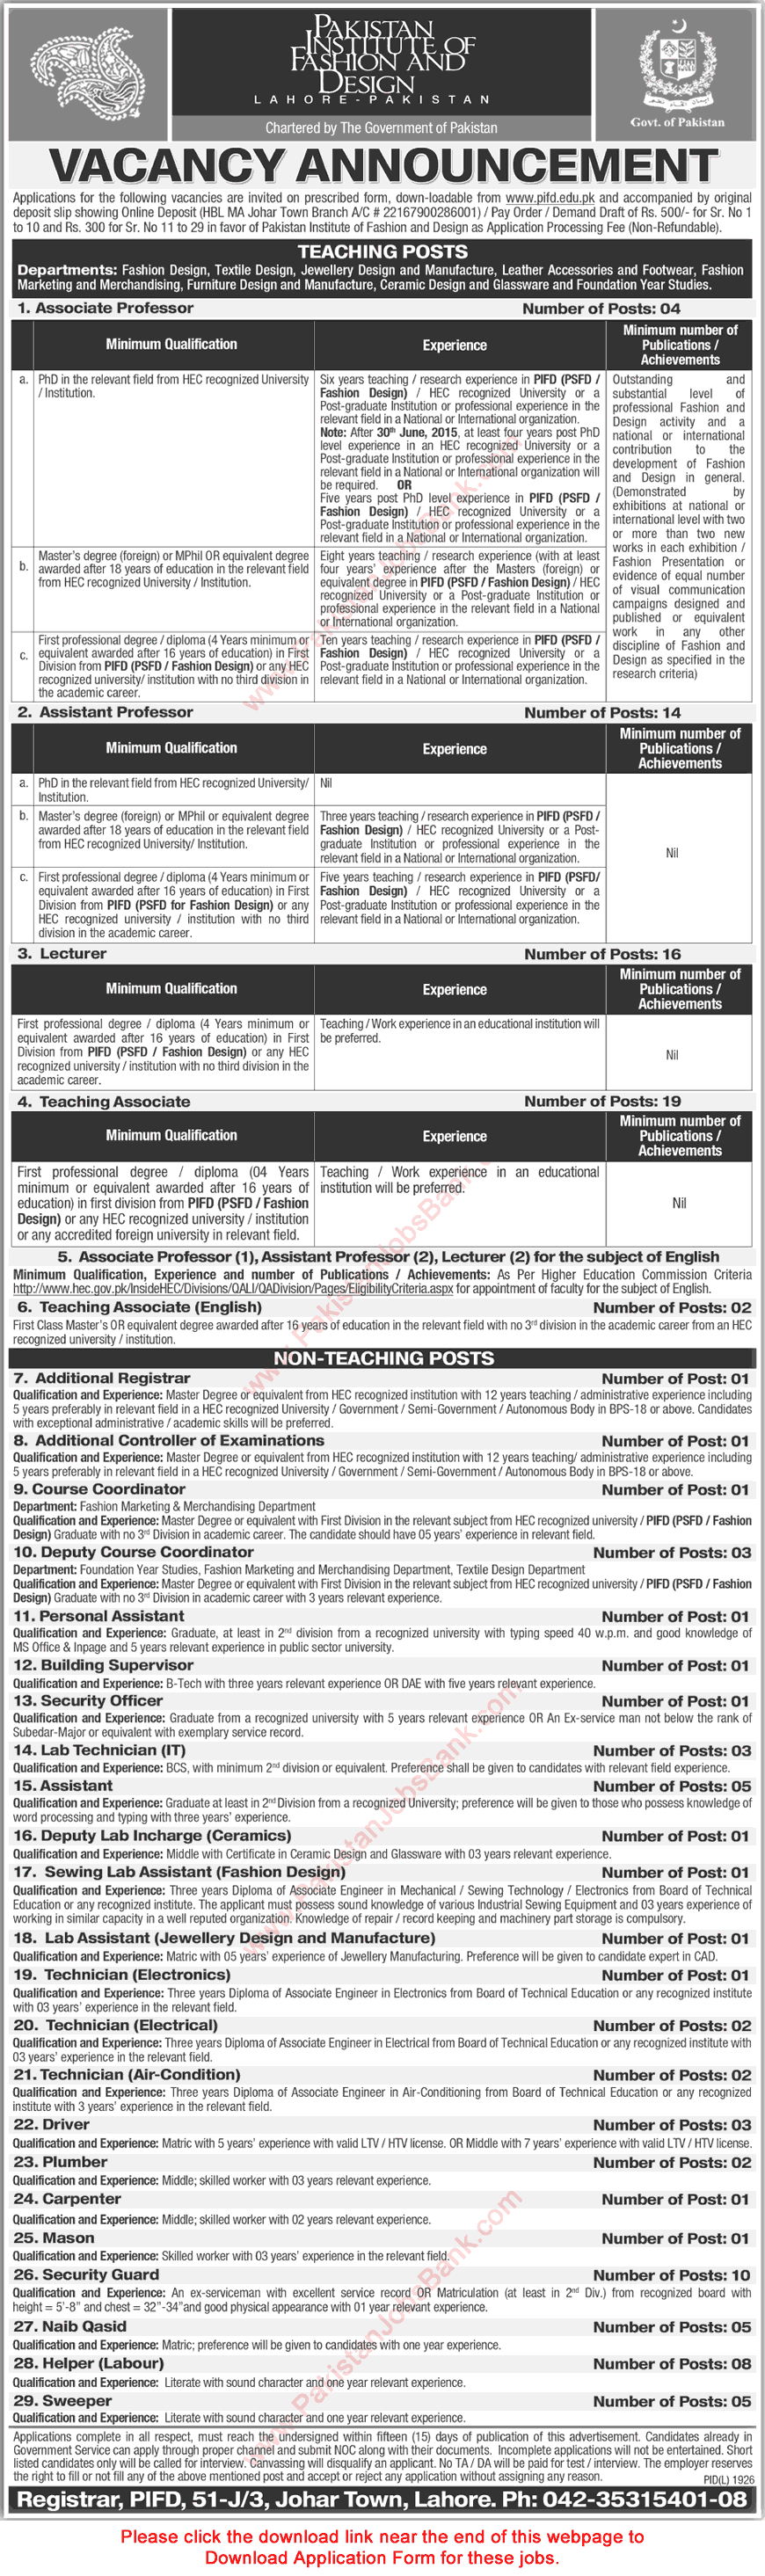 Pakistan Institute of Fashion and Design (PIFD) Lahore Jobs December 2015 / 2016 Application Form Download Latest